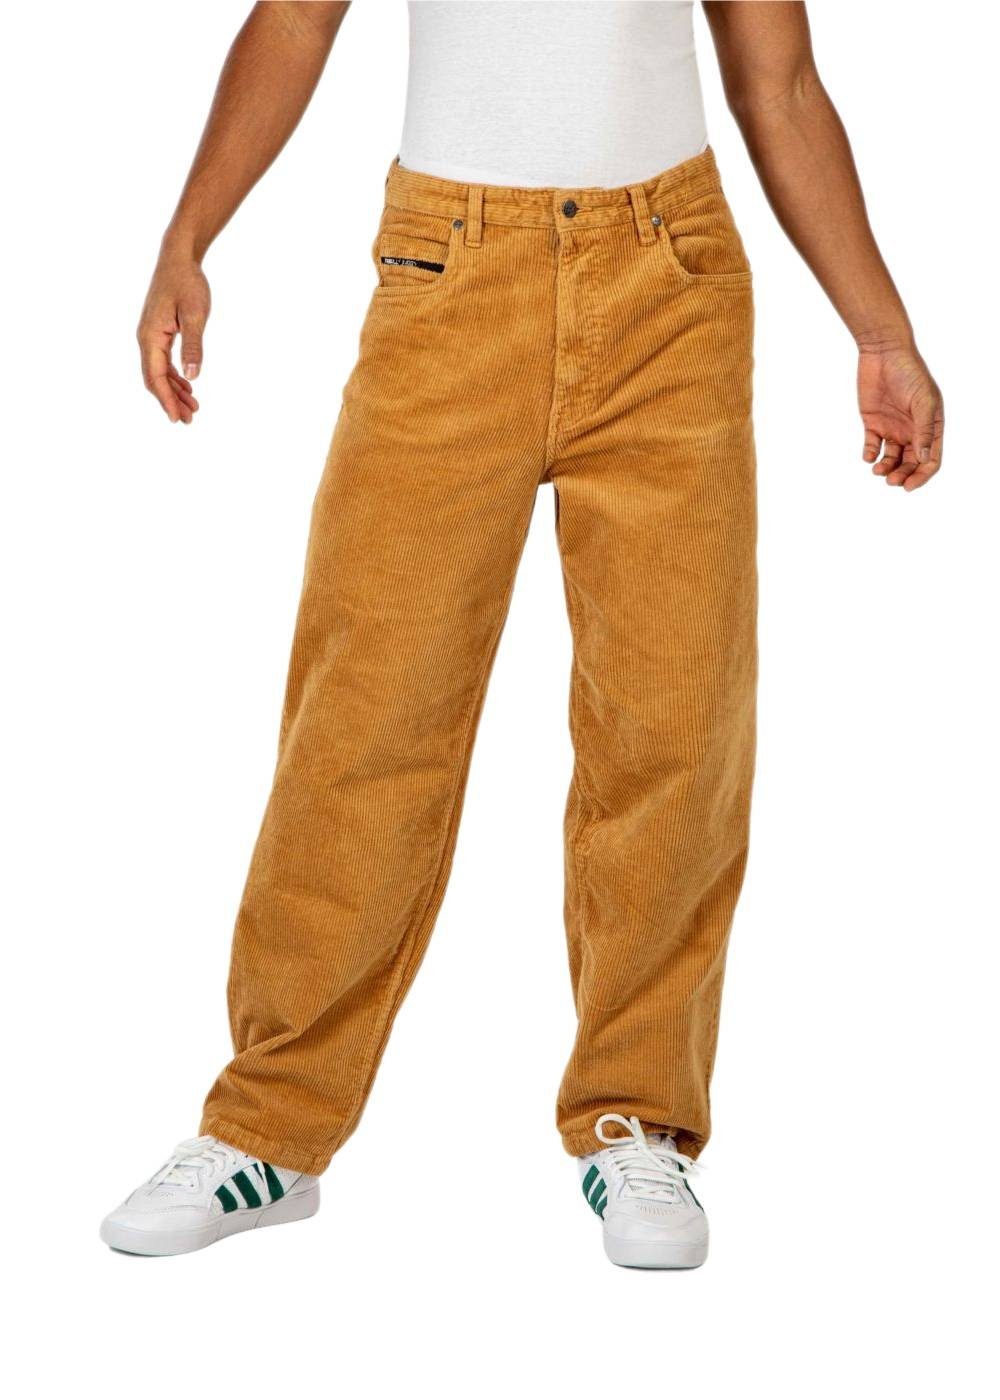 Baggy Cordhose Reell REELL Hose Cord